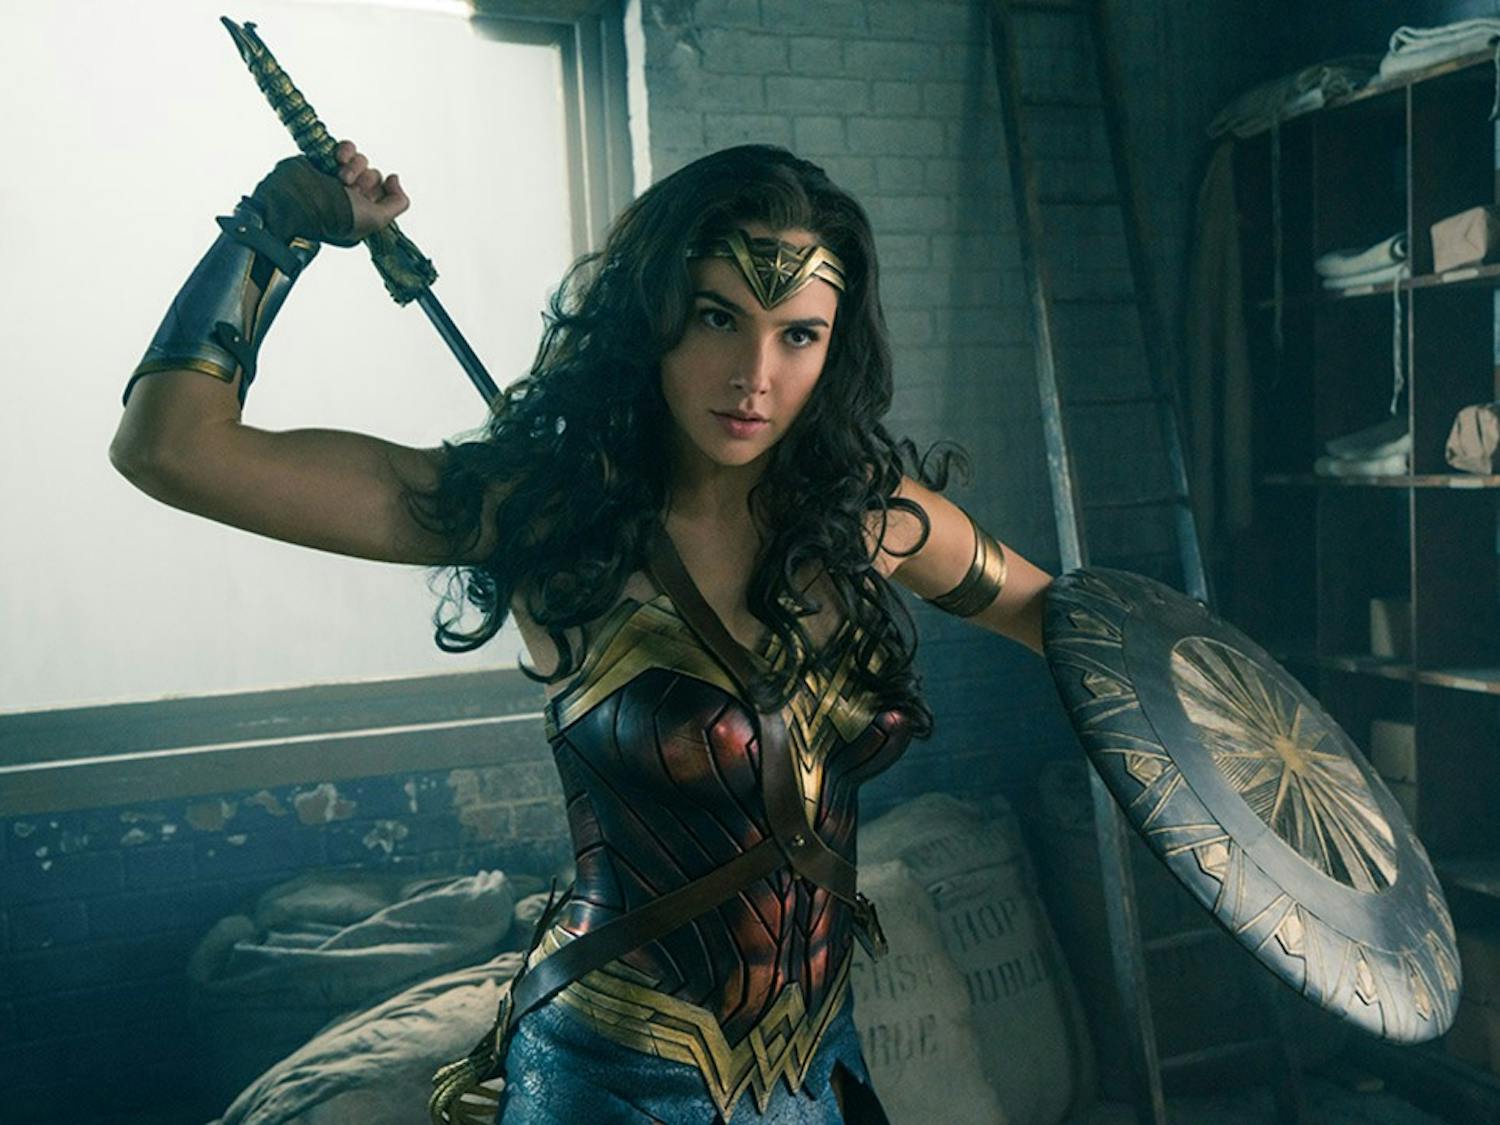 Doesn't Gal Gadot look awesome in "Wonder Woman"? But writers can do bad things even with good characters. (Clay Enos/Warner Bros. Entertainment Inc./Ratpac-Dune Entertainment LLC)